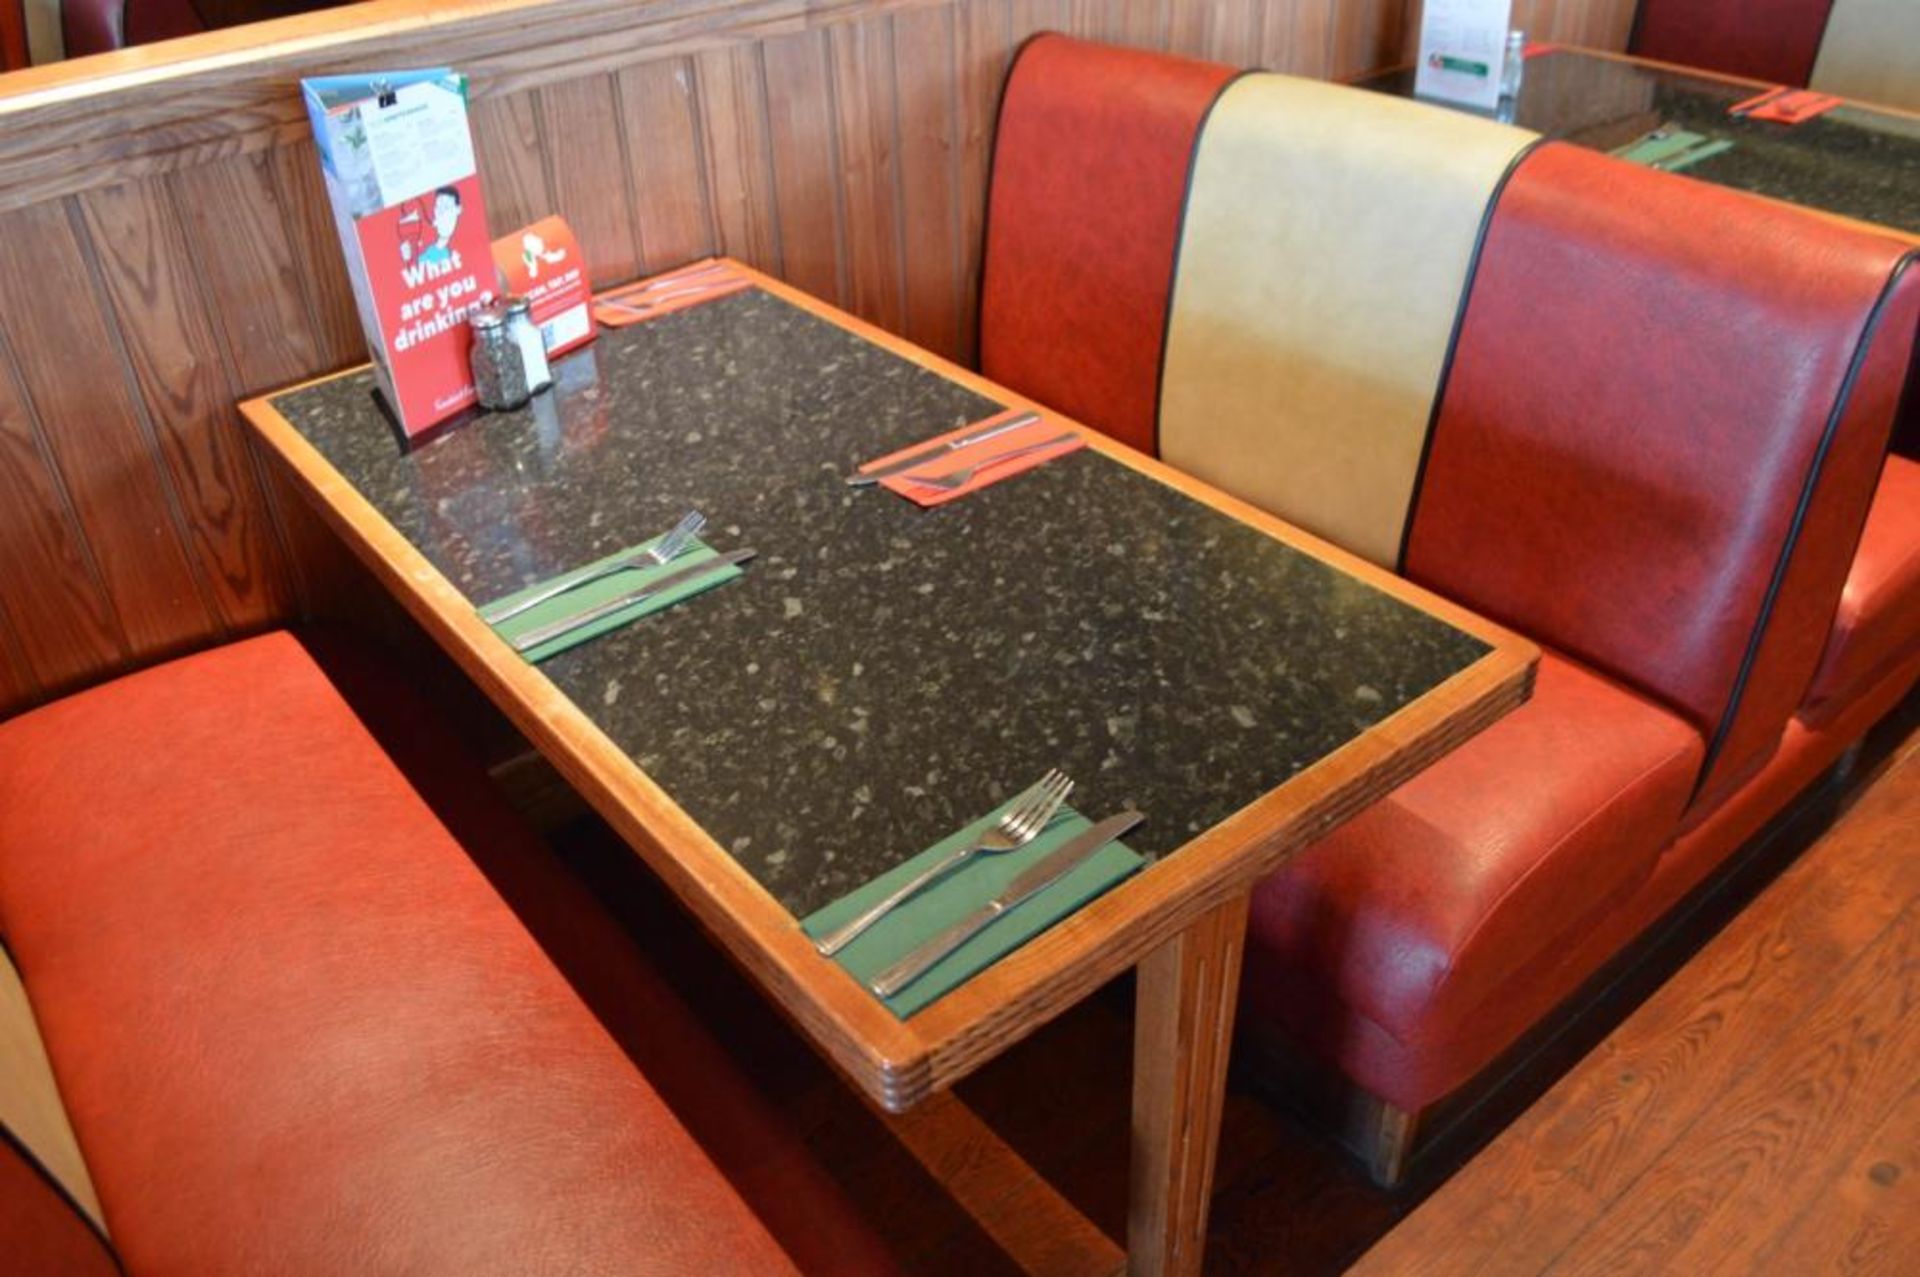 1 x Selection of Cosy Bespoke Seating Booths in a 1950's Retro American Diner Design With Dining Tab - Image 27 of 30